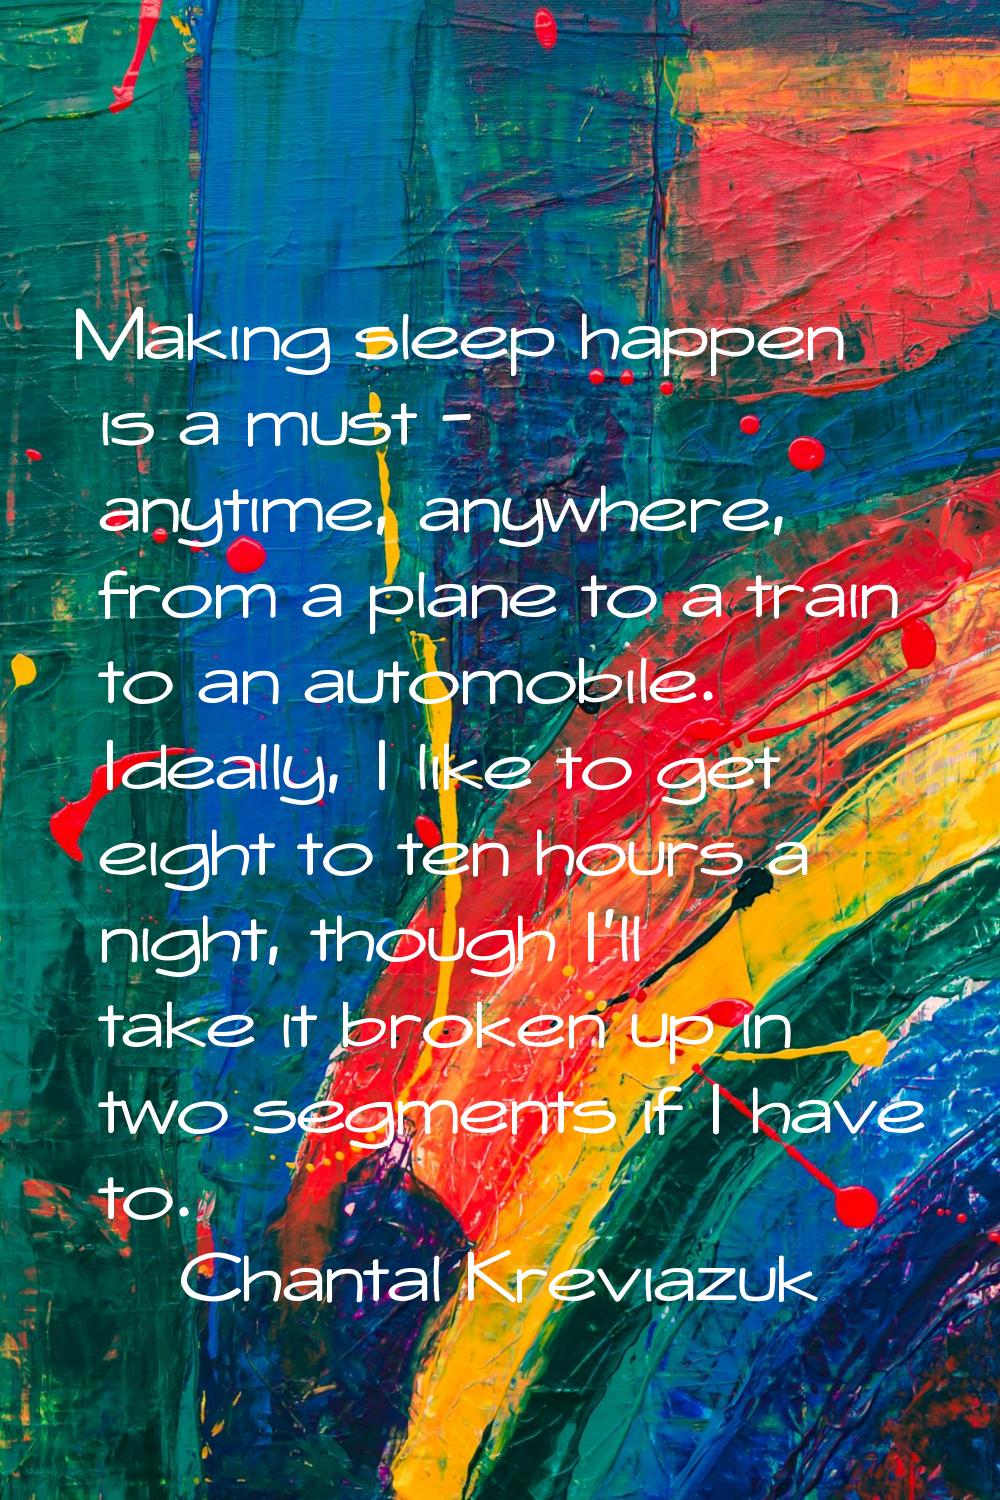 Making sleep happen is a must - anytime, anywhere, from a plane to a train to an automobile. Ideall